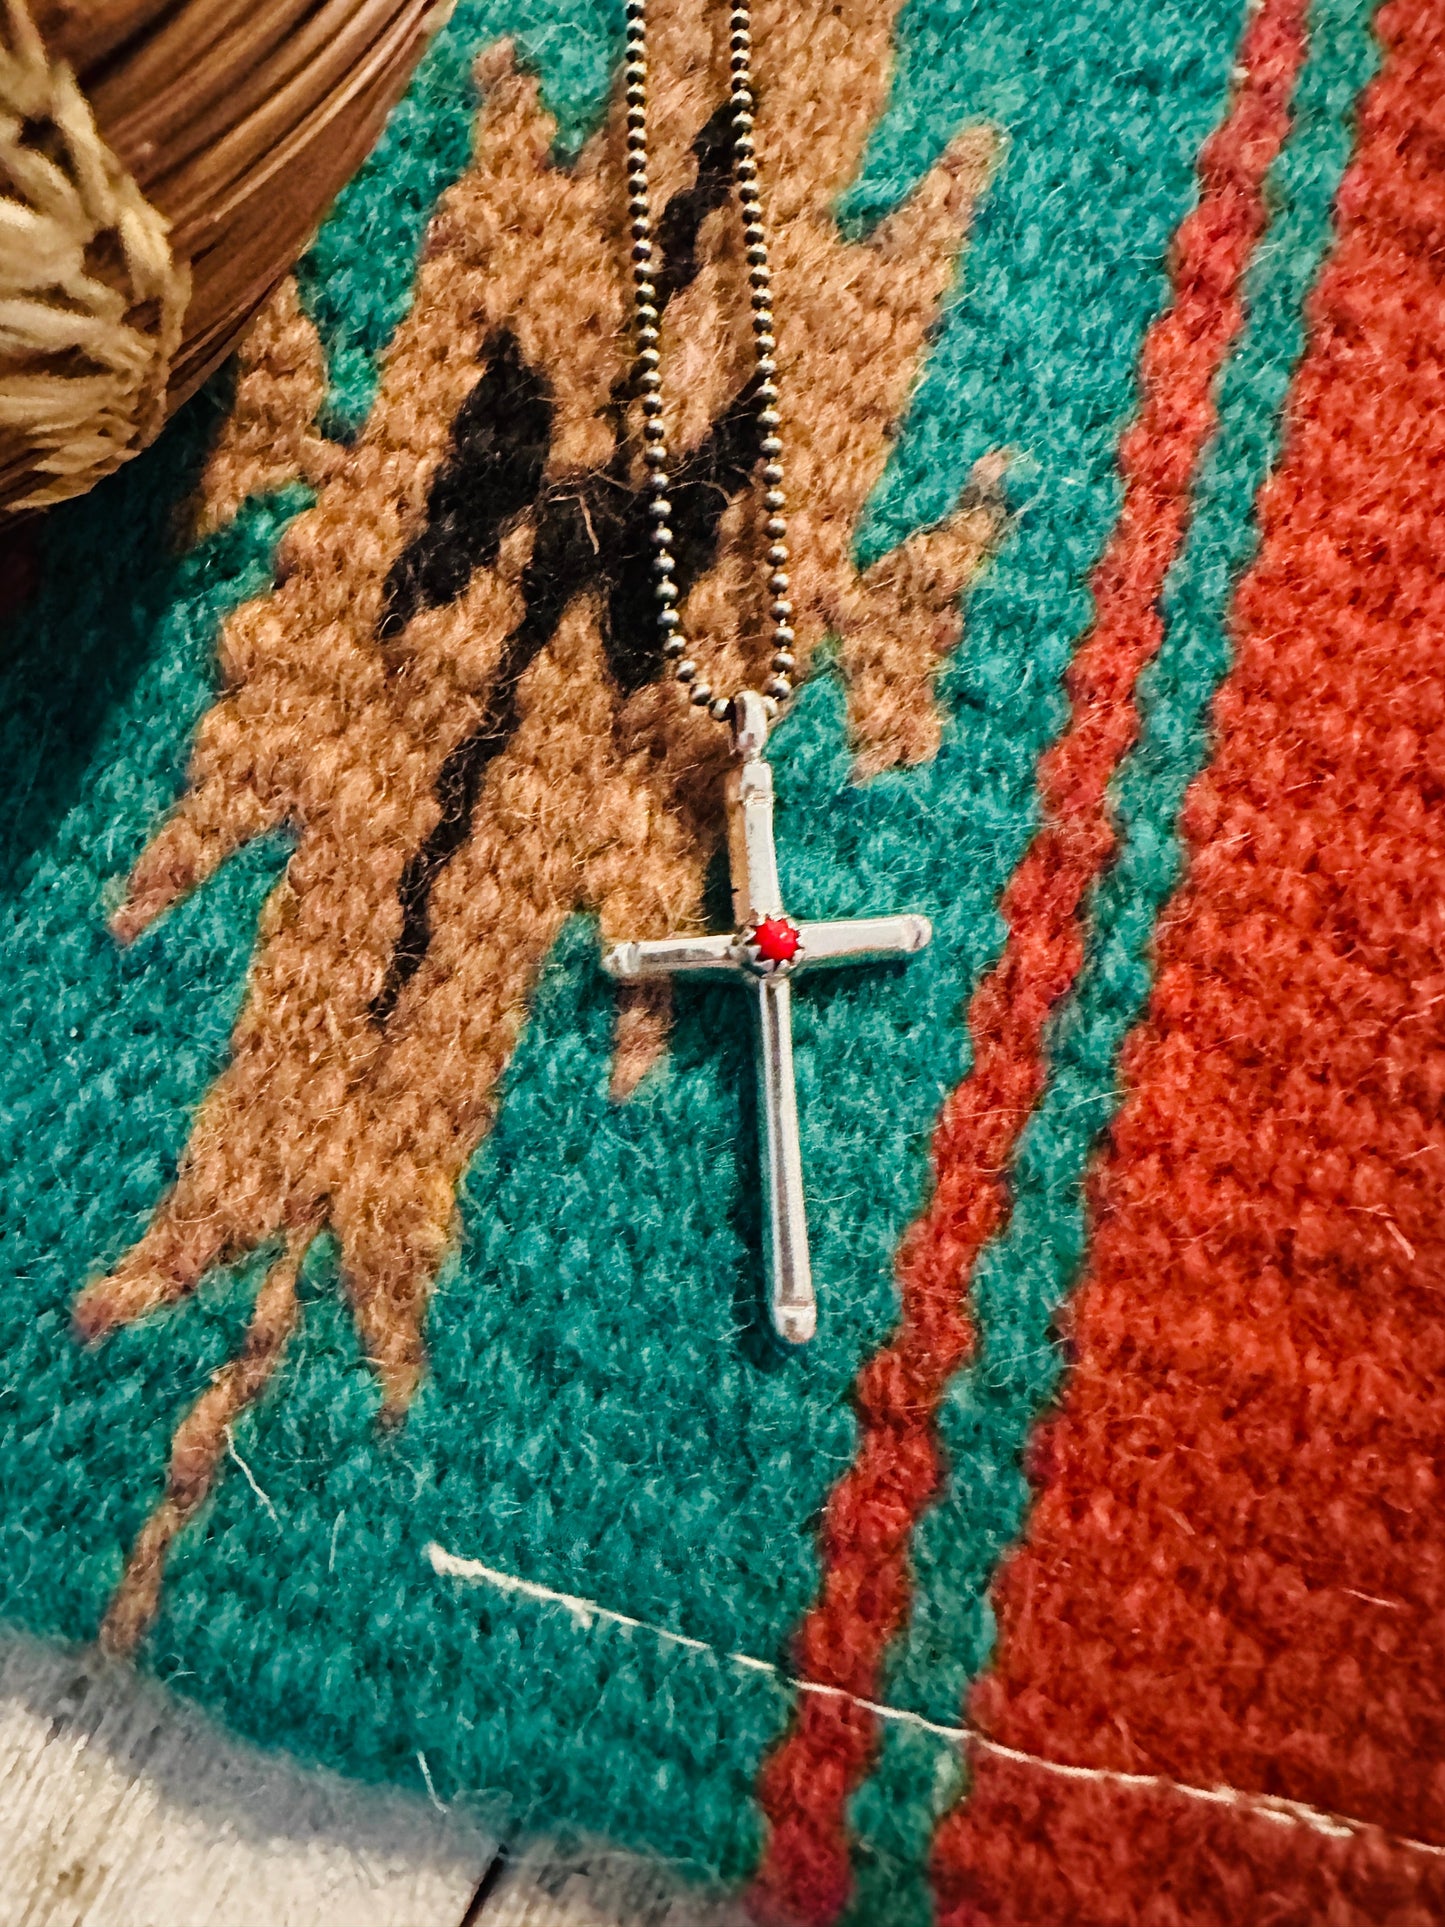 Navajo Sterling Silver & Coral Cross Pendant Signed